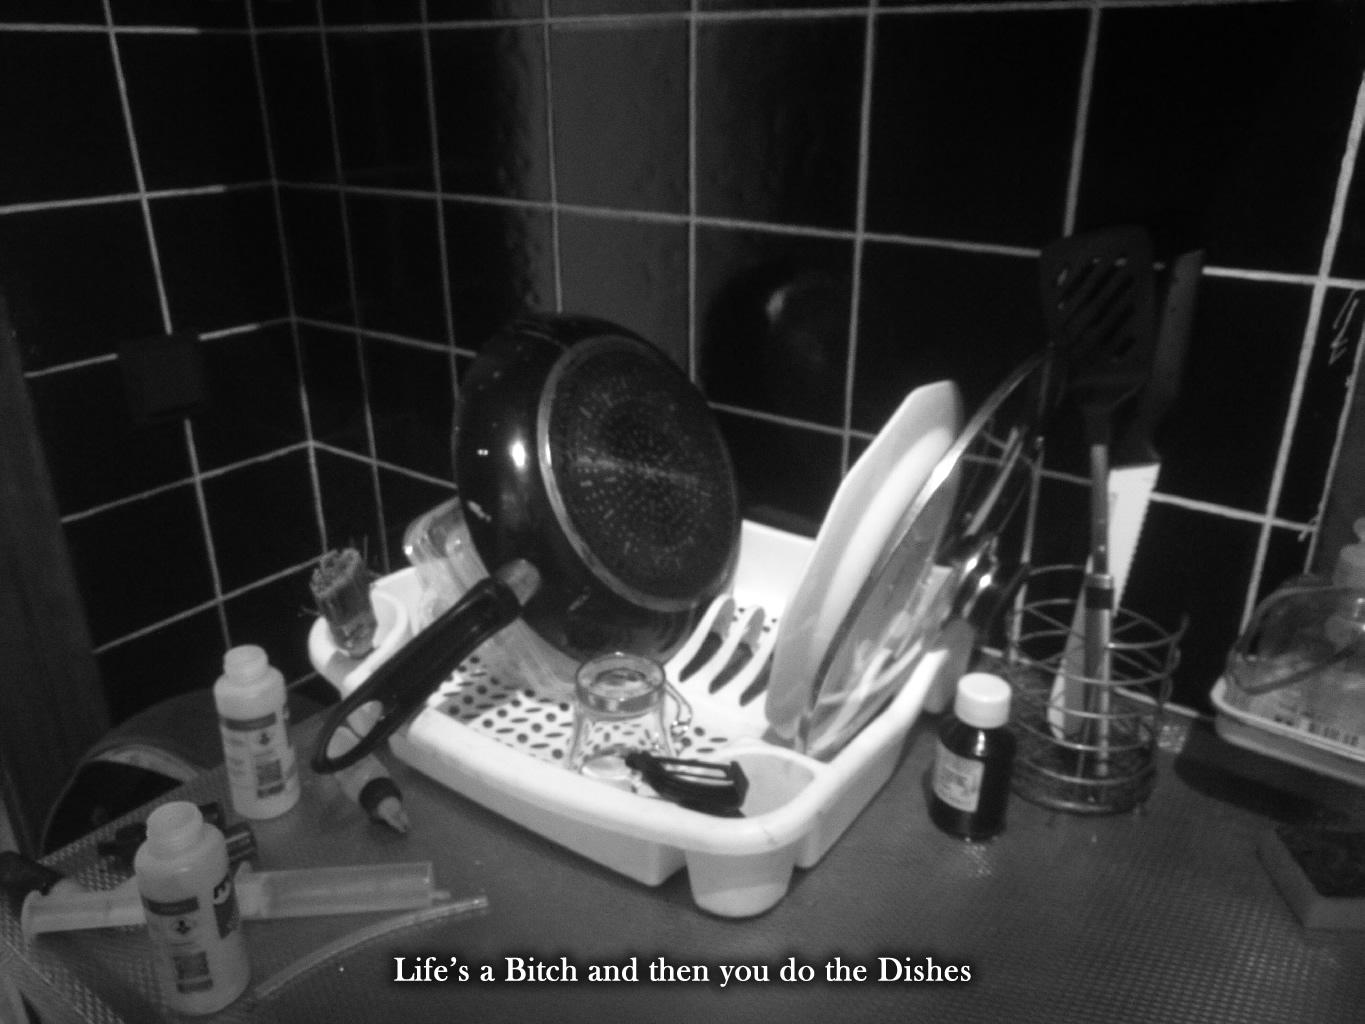 Life’s a Bitch and then you do the Dishes